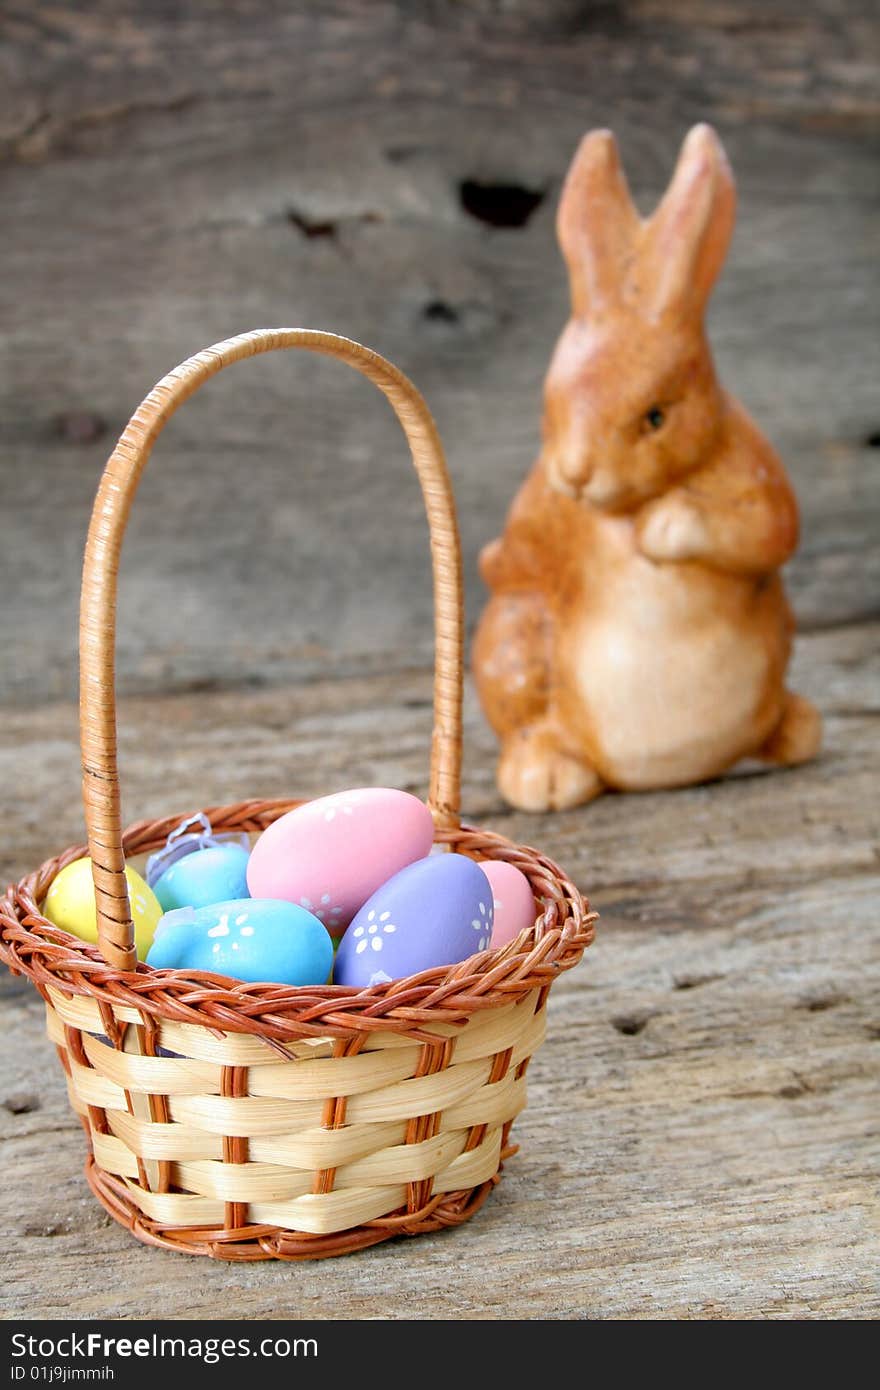 An Easter basket full of tiny and colorful eggs with a bunny in the background.  Used a shallow depth of field and selective focus. An Easter basket full of tiny and colorful eggs with a bunny in the background.  Used a shallow depth of field and selective focus.